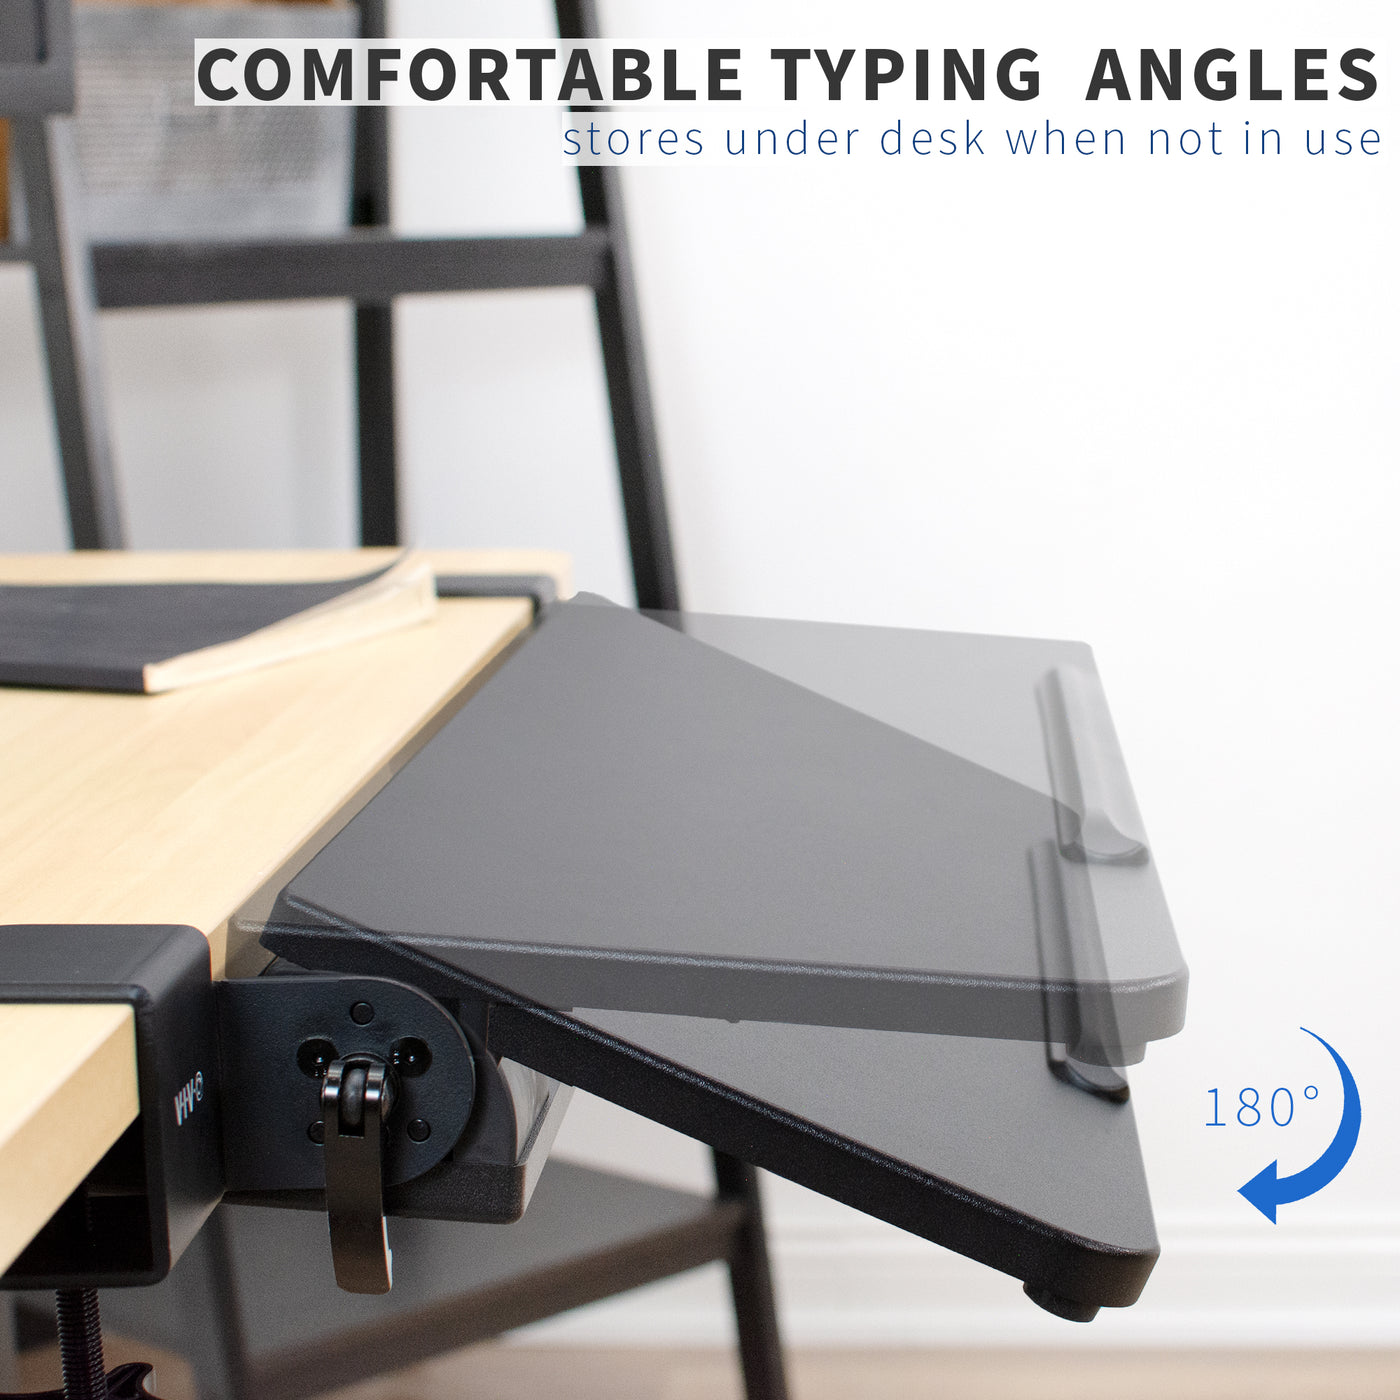 Achieve the most comfortable typing angles with a tilting keyboard tray.